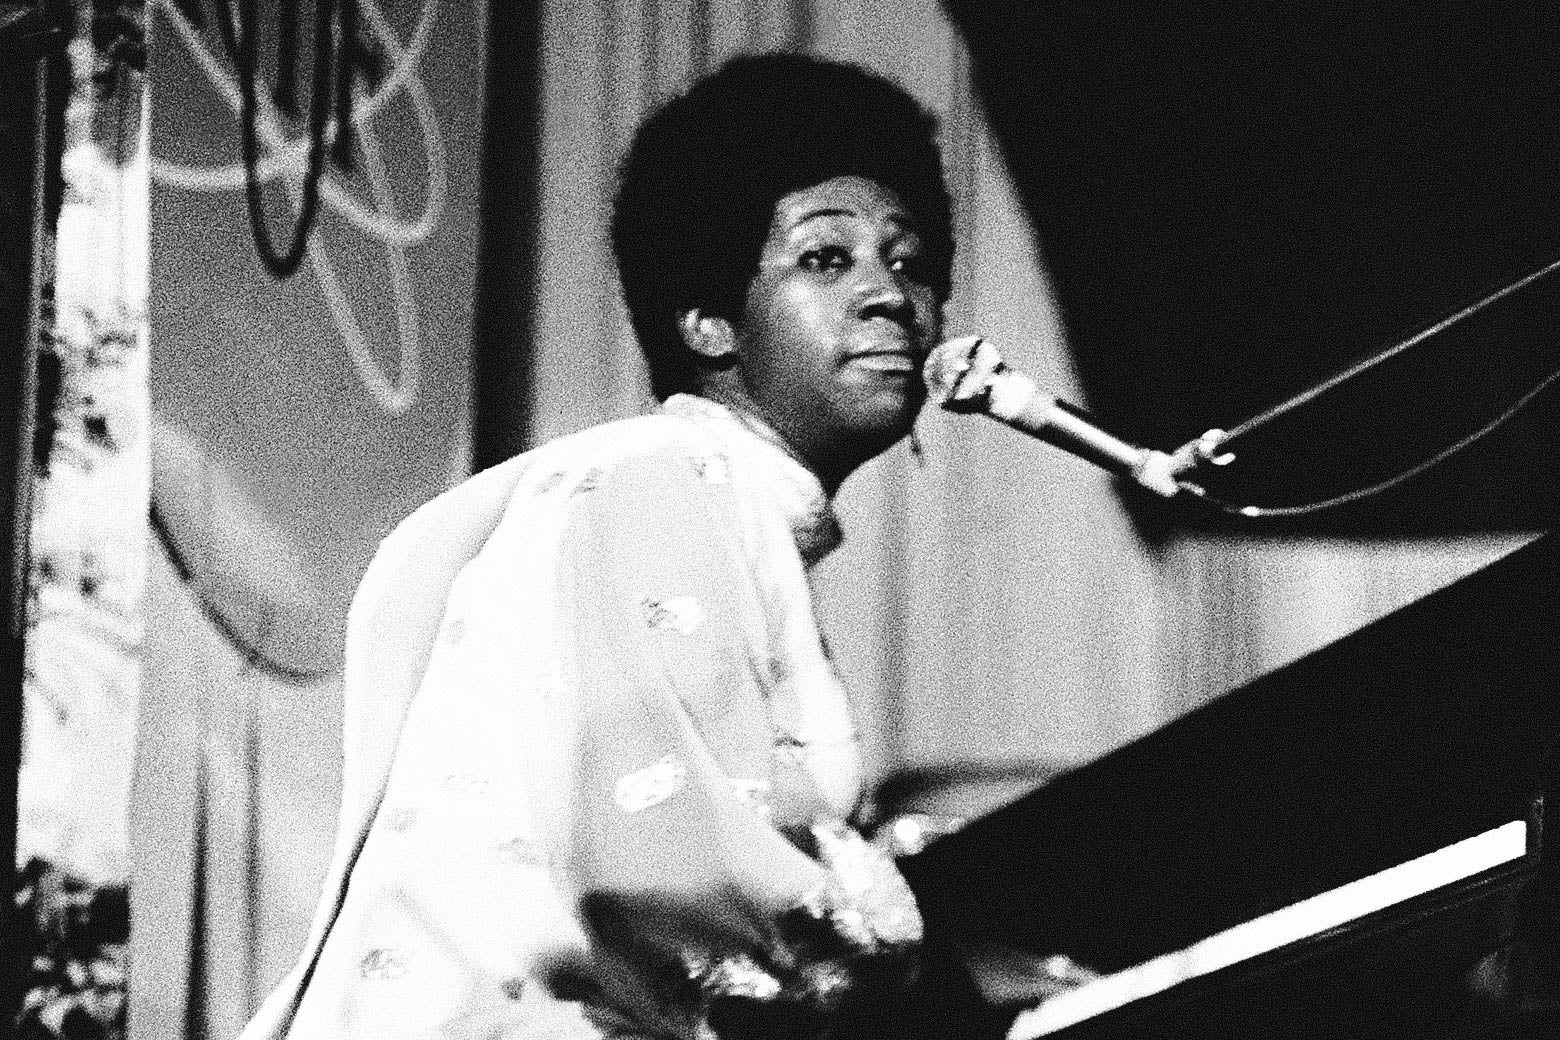 A black-and-white photo of Aretha Franklin at a piano.